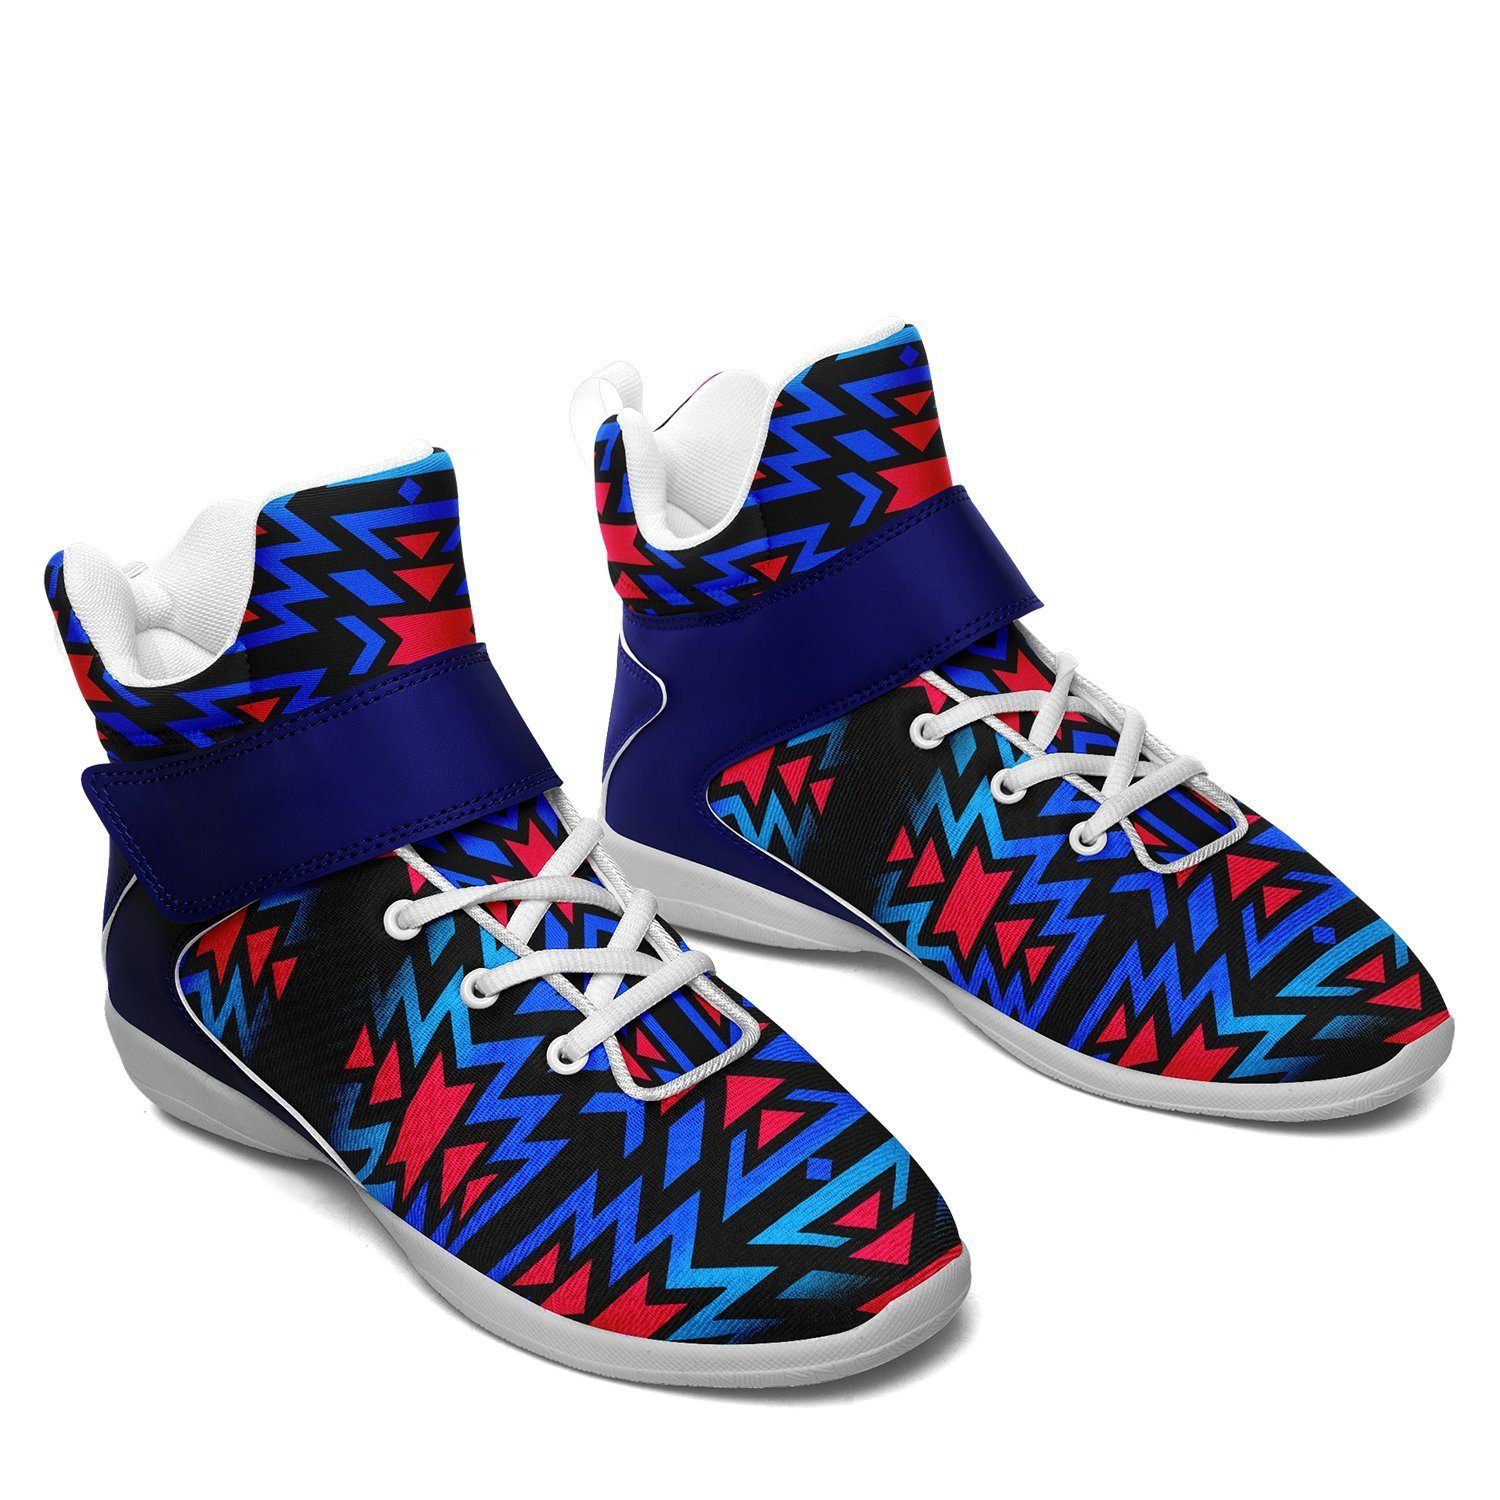 Black Fire Dragonfly Ipottaa Basketball / Sport High Top Shoes - White Sole 49 Dzine 